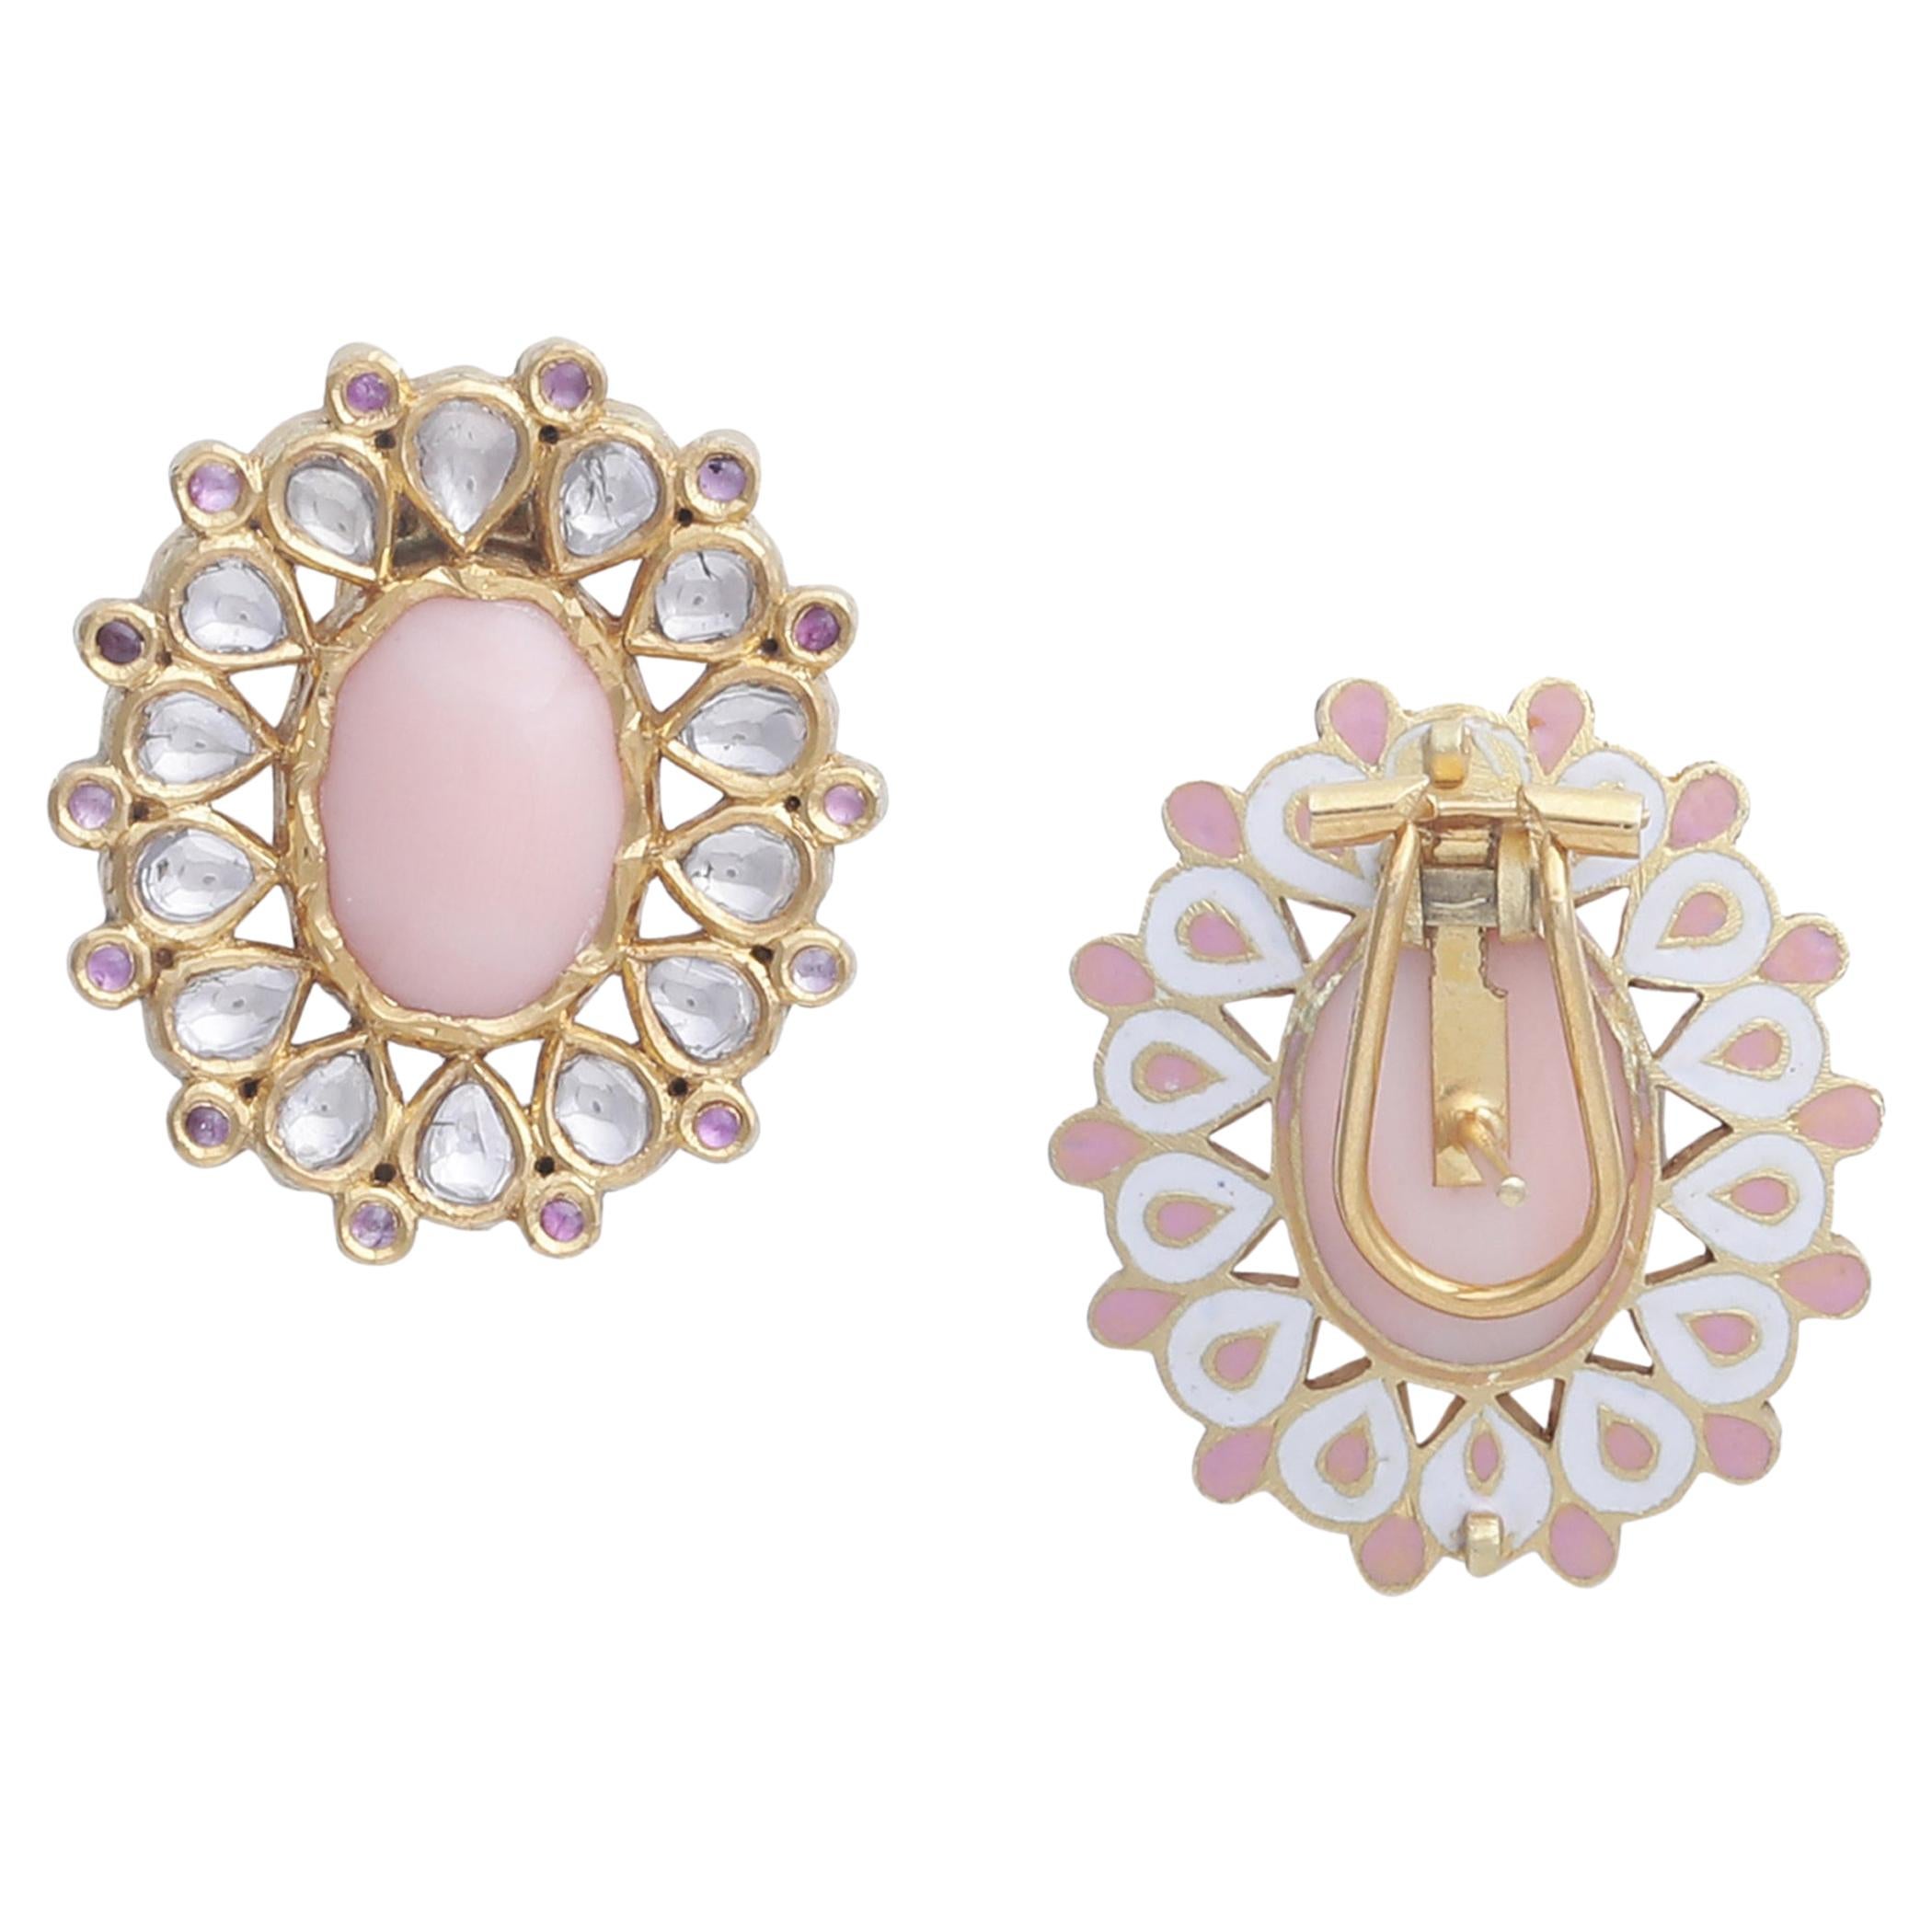 Pink Coral and Uncut Diamond Earring Handcrafted in 18 Karat Gold with Enamel